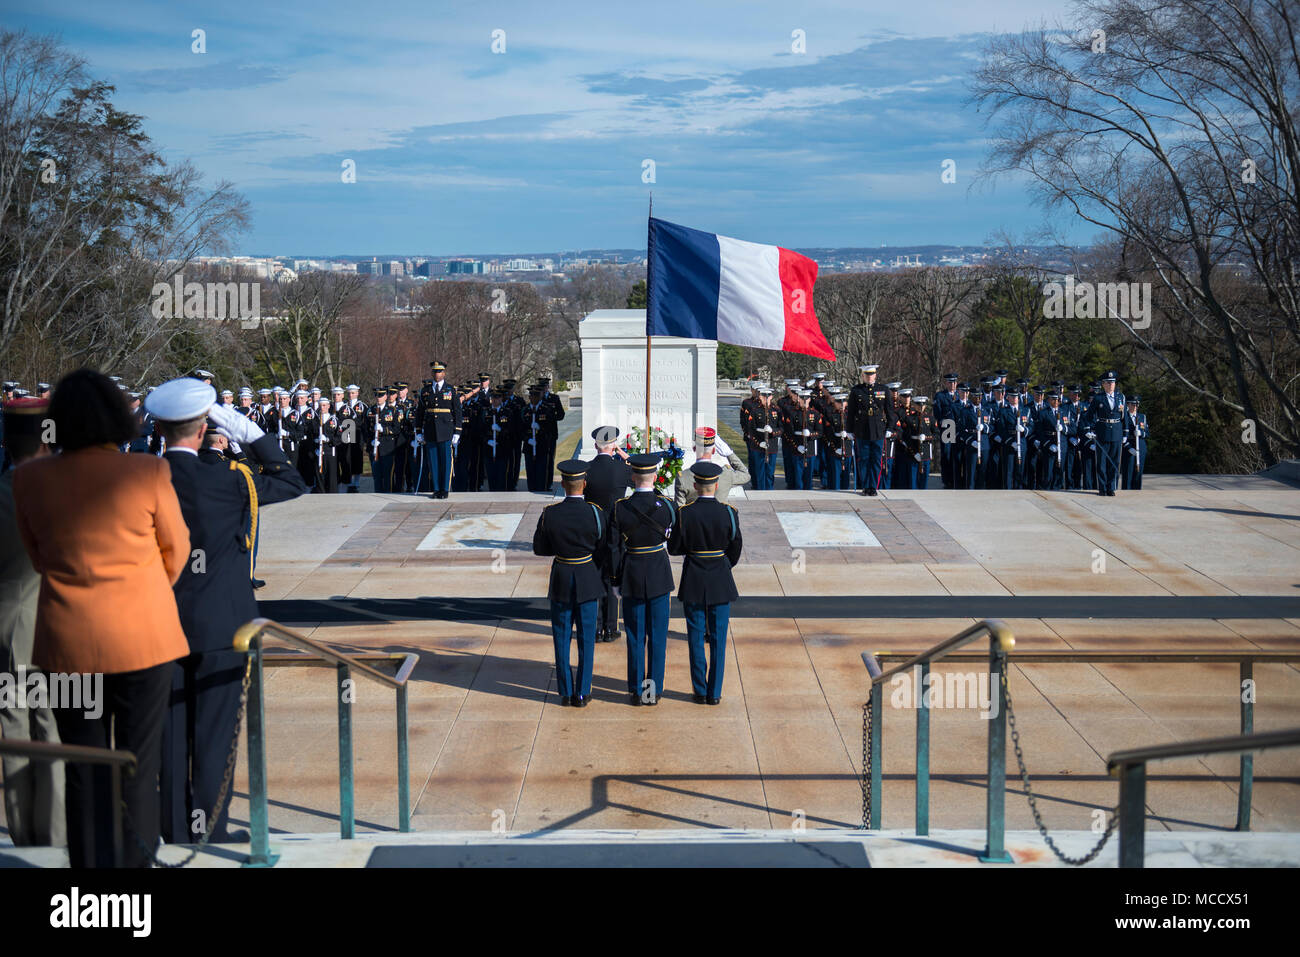 Maj. Gen. John P. Sullivan (left), assistant deputy chief of staff, G-4; and Gen. François Lecointre (right), chief of the defence staff, French Armed Forces;  render honors during an Armed Forces Full Honors Wreath-Laying Ceremony at the Tomb of the Unknown Soldier at Arlington National Cemetery, Arlington, Virginia, Feb. 12, 2018. Lecointre visited ANC as part of his first official visit, touring the Memorial Amphitheater Display Room and meeting with ANC Senior Leadership. (U.S. Army photo by Elizabeth Fraser / Arlington National Cemetery / released) Stock Photo